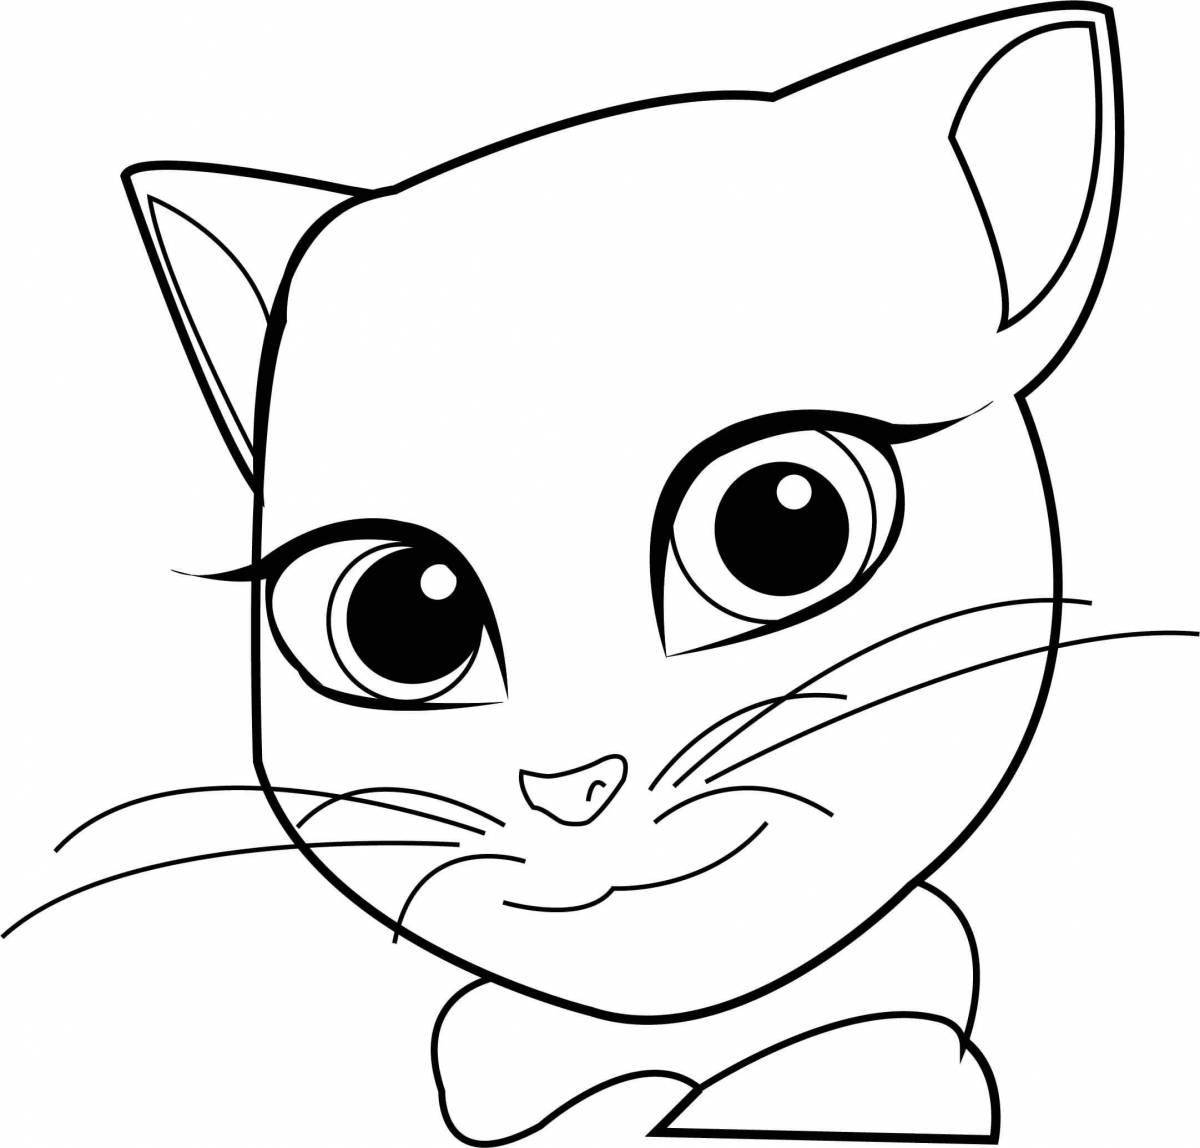 Angela kitty colorful coloring page